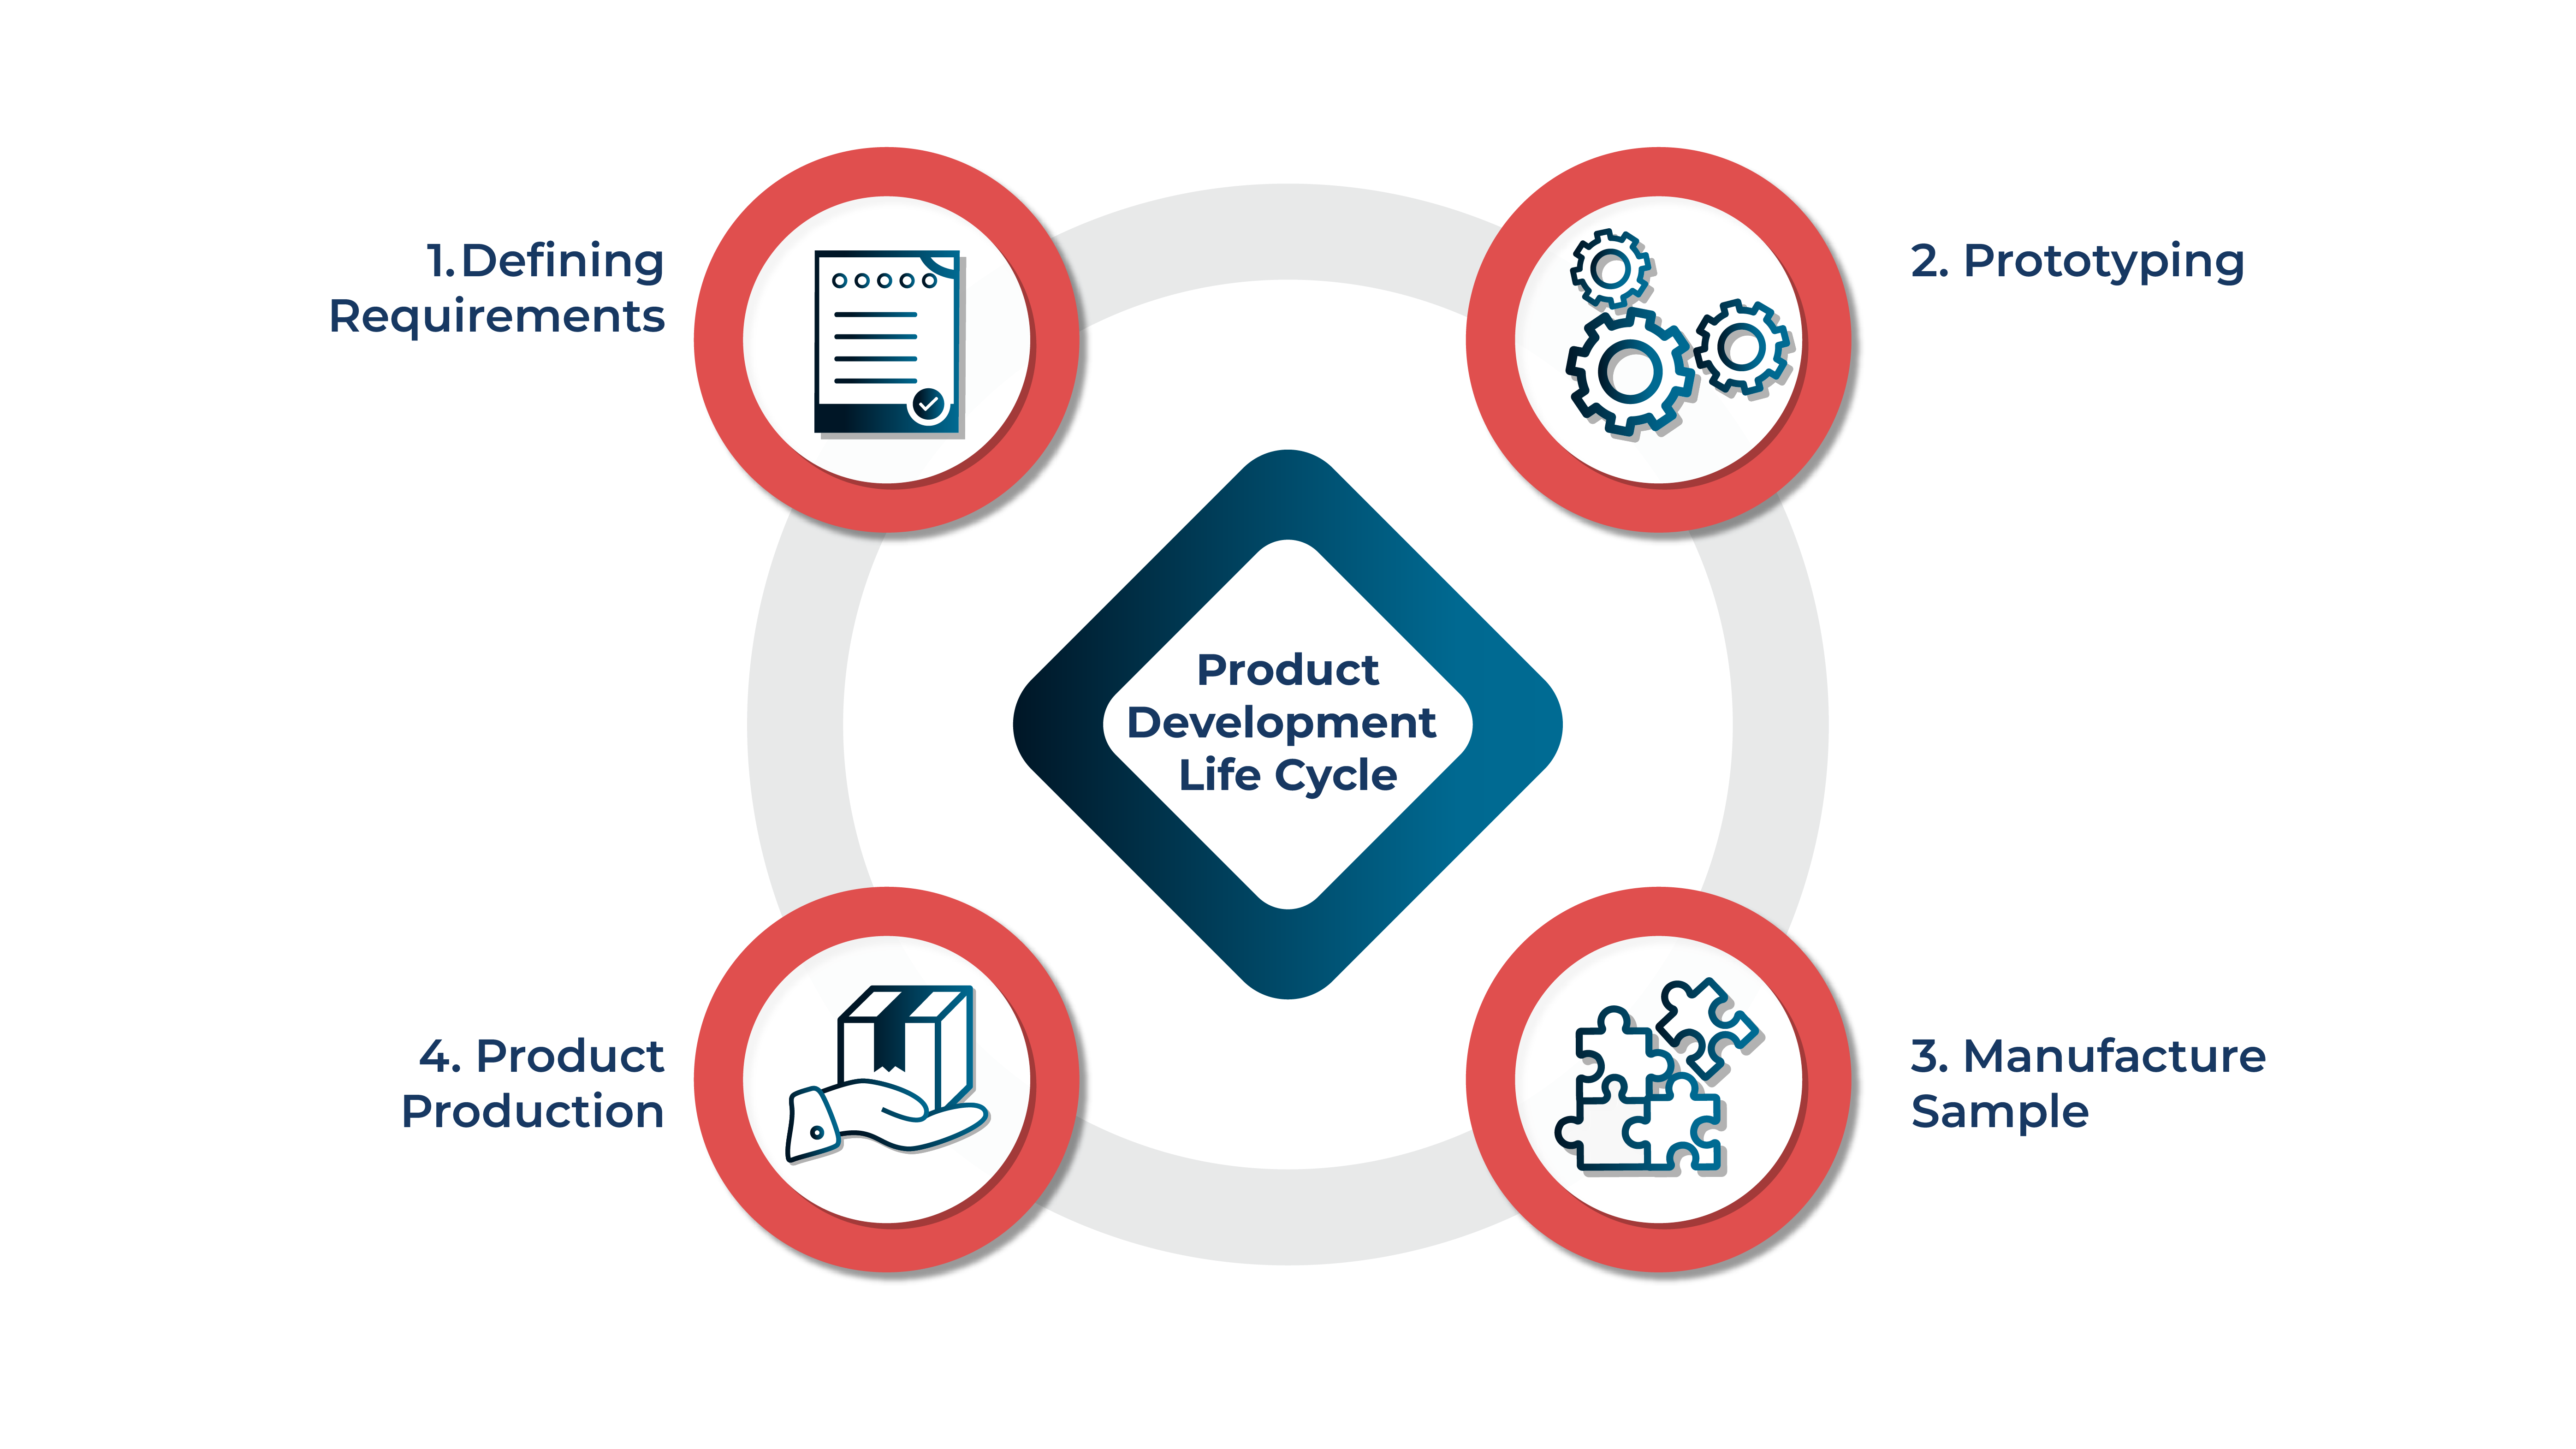 The steps to custom product development